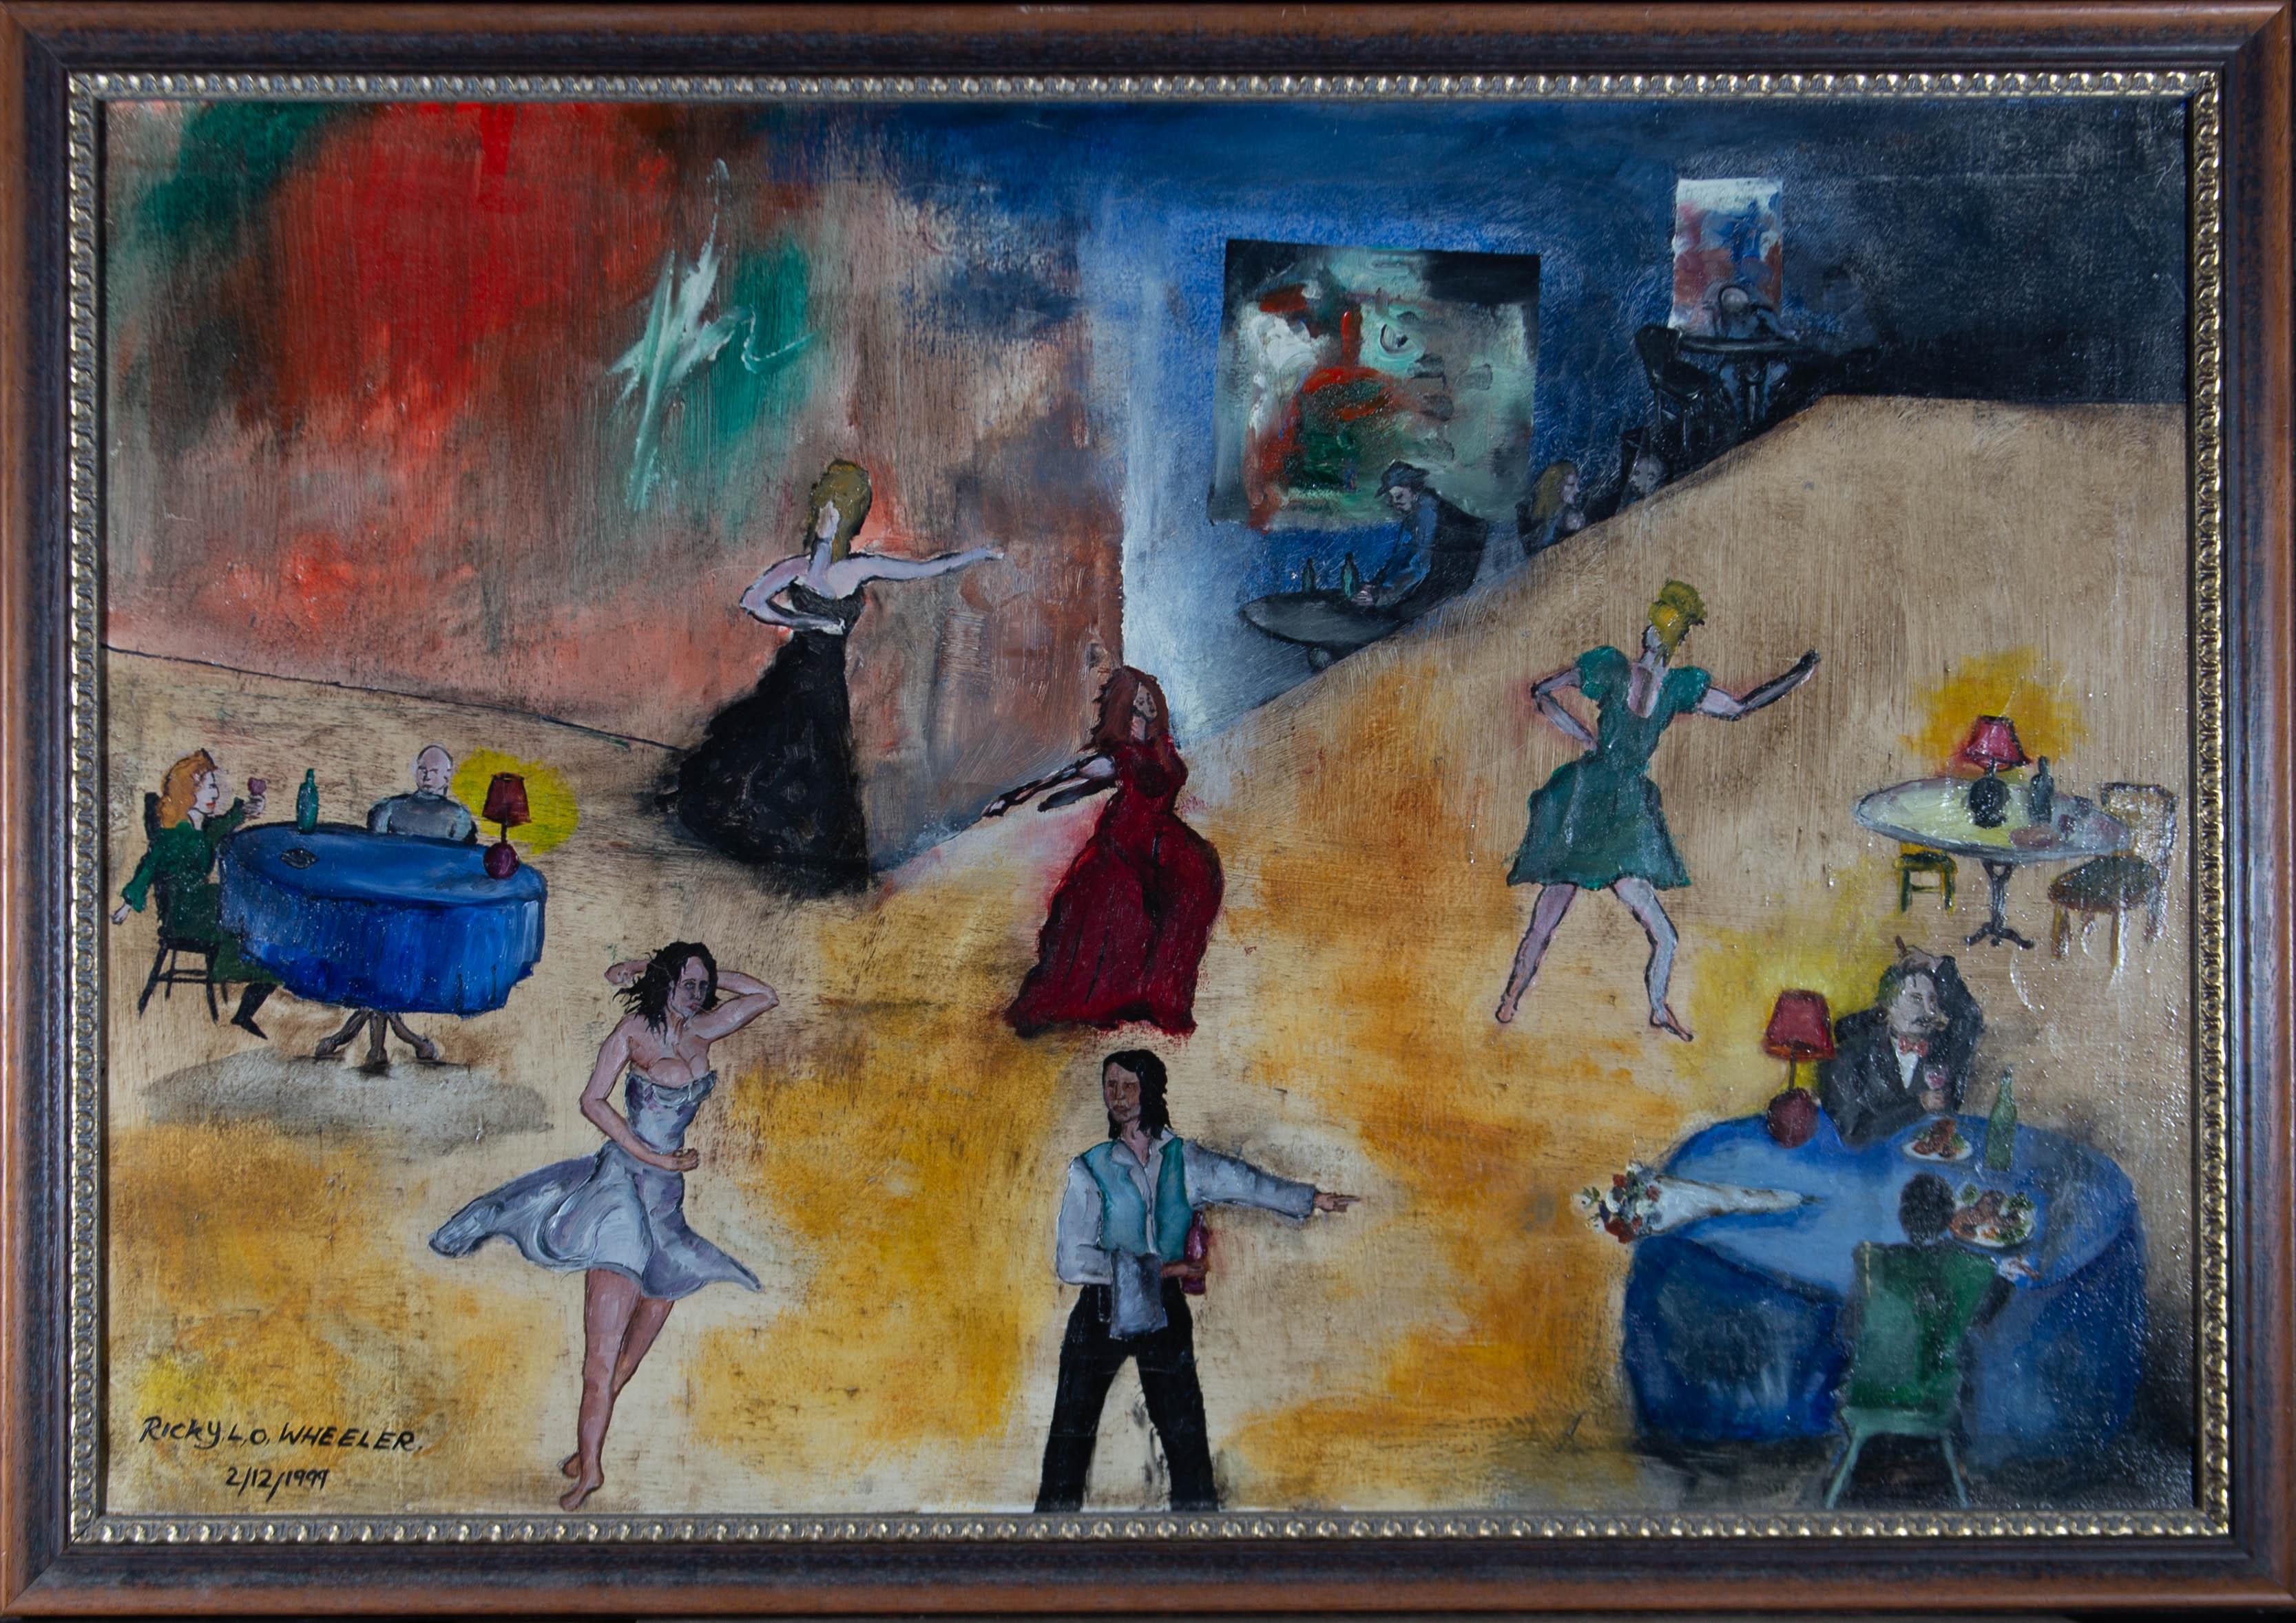 A surreal bar interior showing patrons sitting in a spaced out room at tables, eating and drinking. four women are engrossed in wild dancing in the middle. This strange scene has been signed and dated in the lower left corner and the painting has